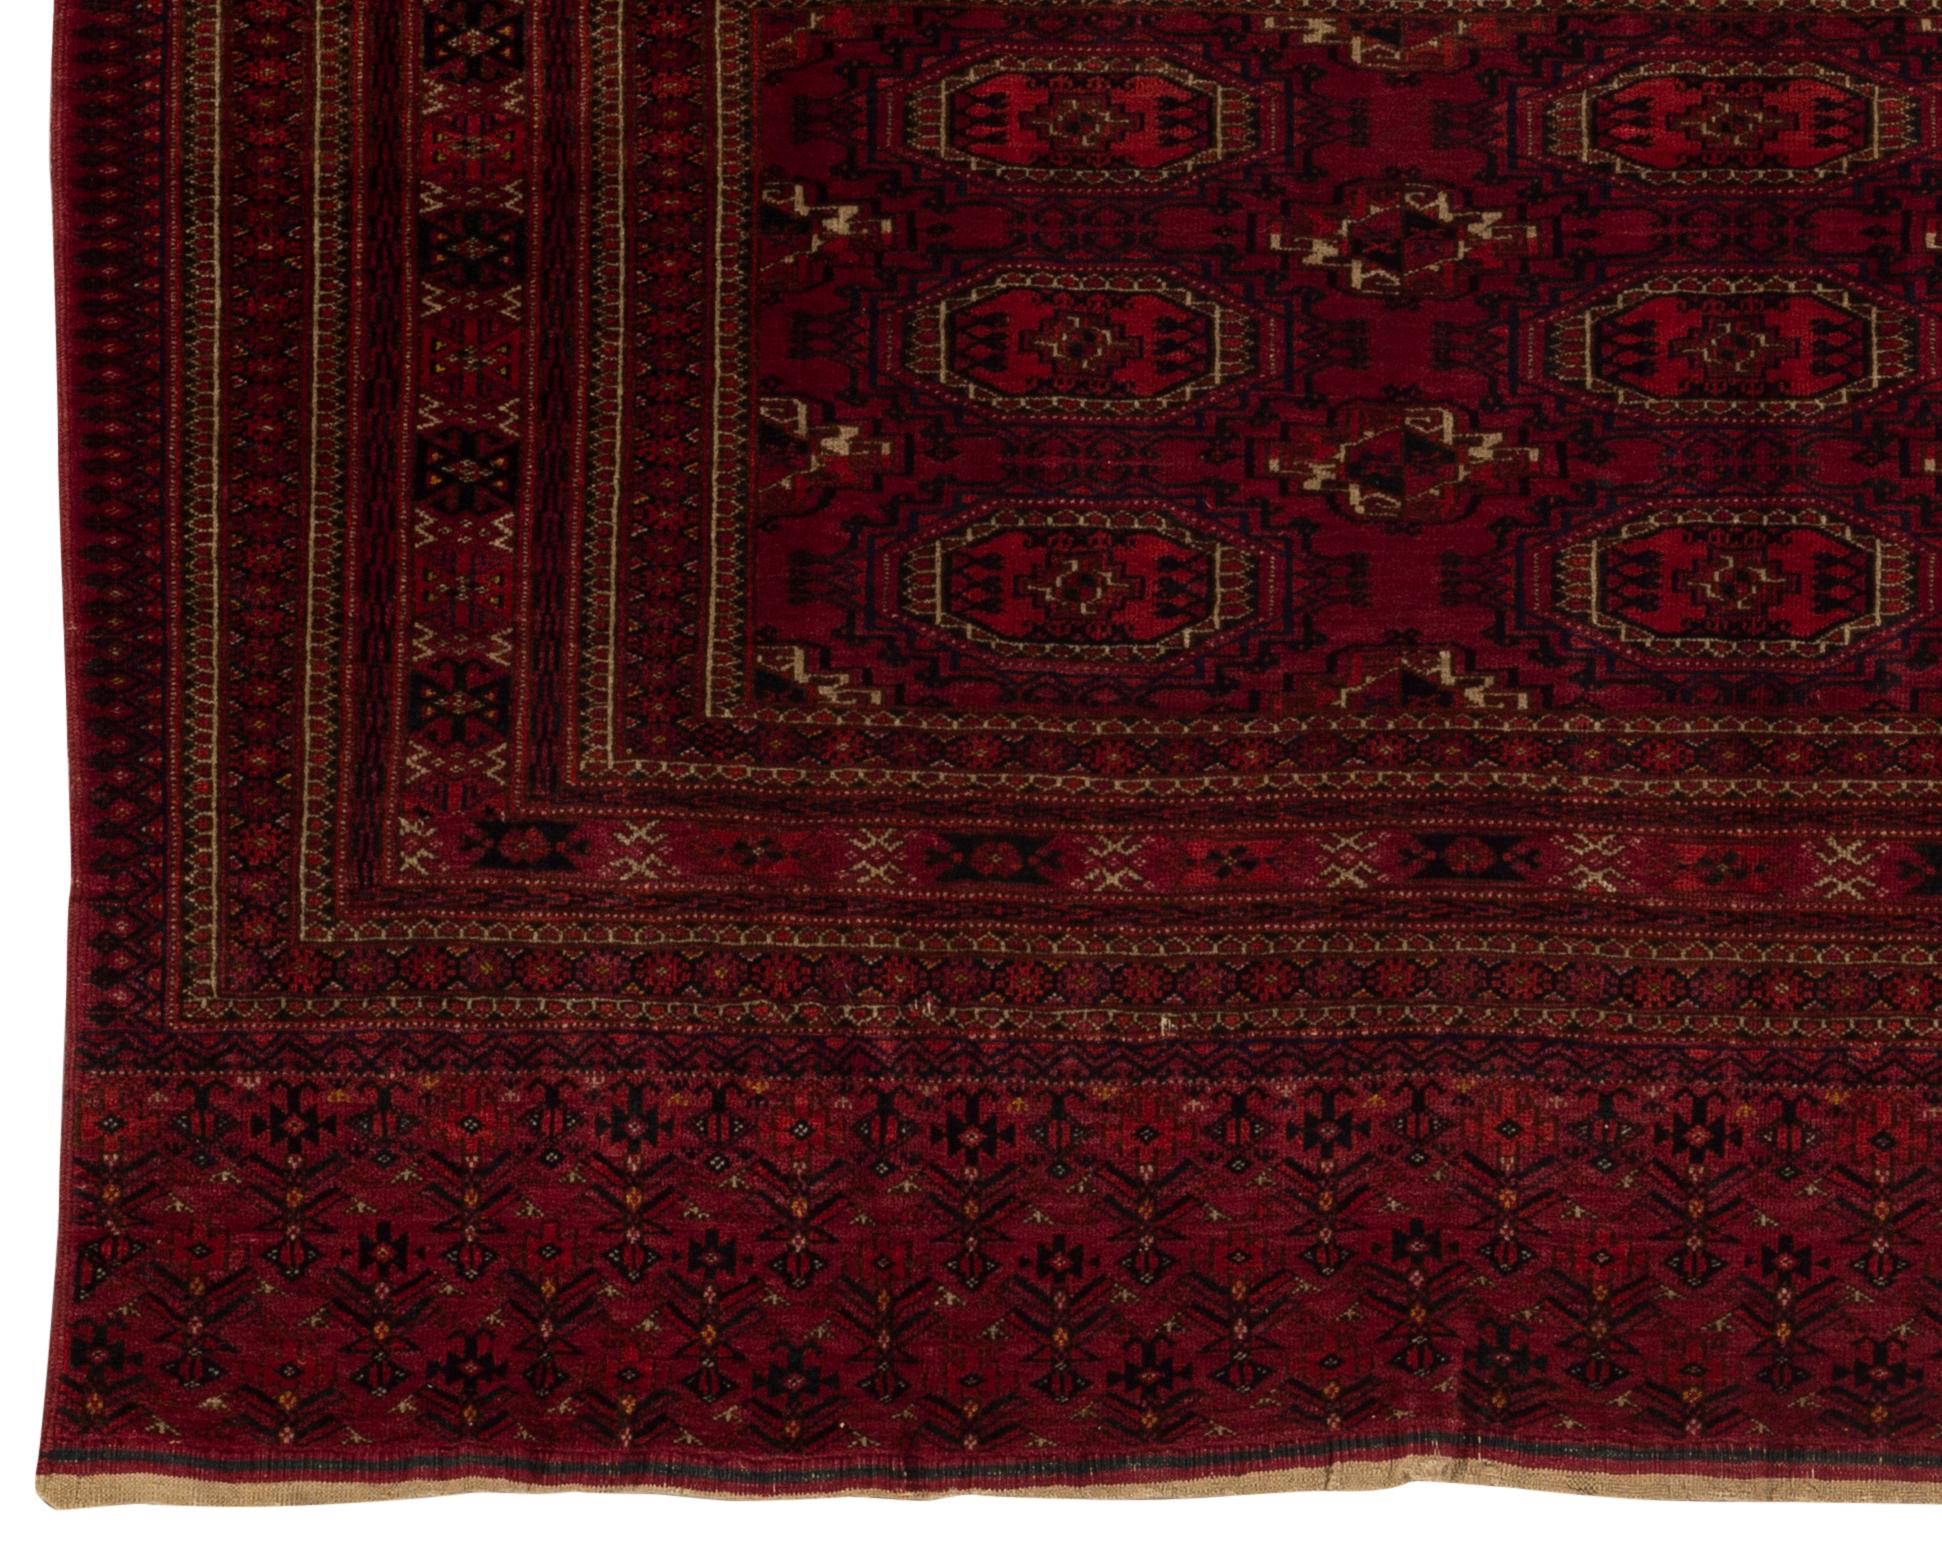 Antique Turkoman rug, circa 1890. A Turkoman or Turkmen rug from Turkmenistan formerly part of the Soviet Union. These are tribal rugs easily identifiable by their colors and the ethnic symbols used in the weavings. This lovely small rug is a